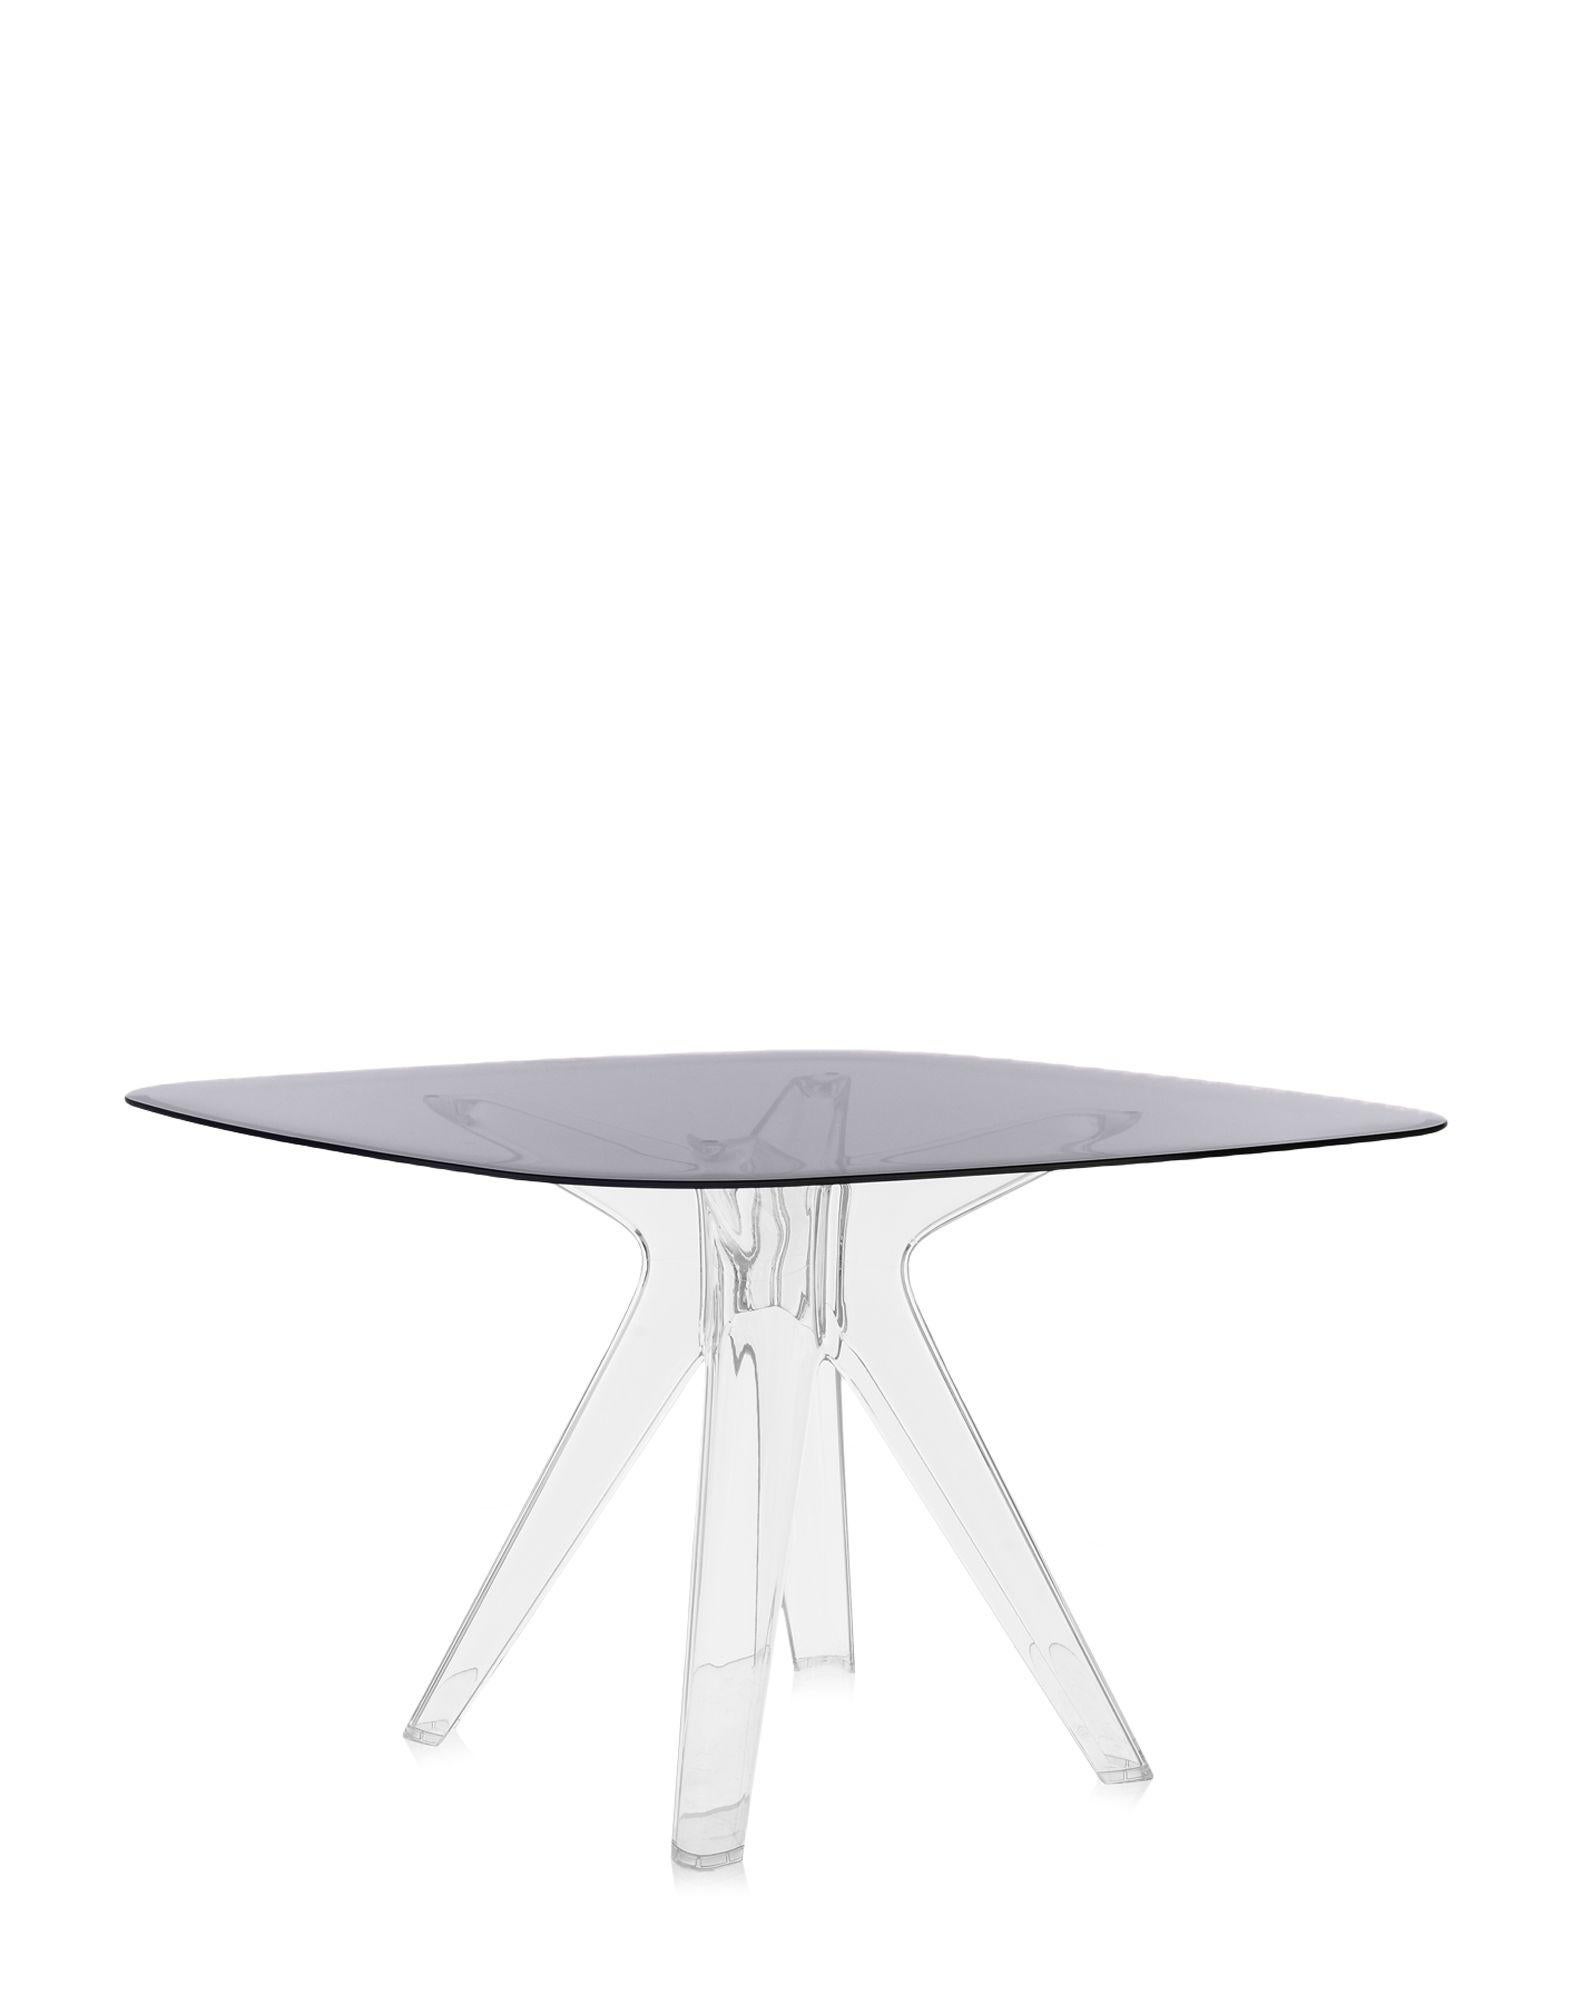 Kartell lifestyle enhances the living room with Philippe Starck’s Blast, a coffee table square with rounded corners and clear bases and tops. The design is a development of the Sir Gio table. The central core of the base is